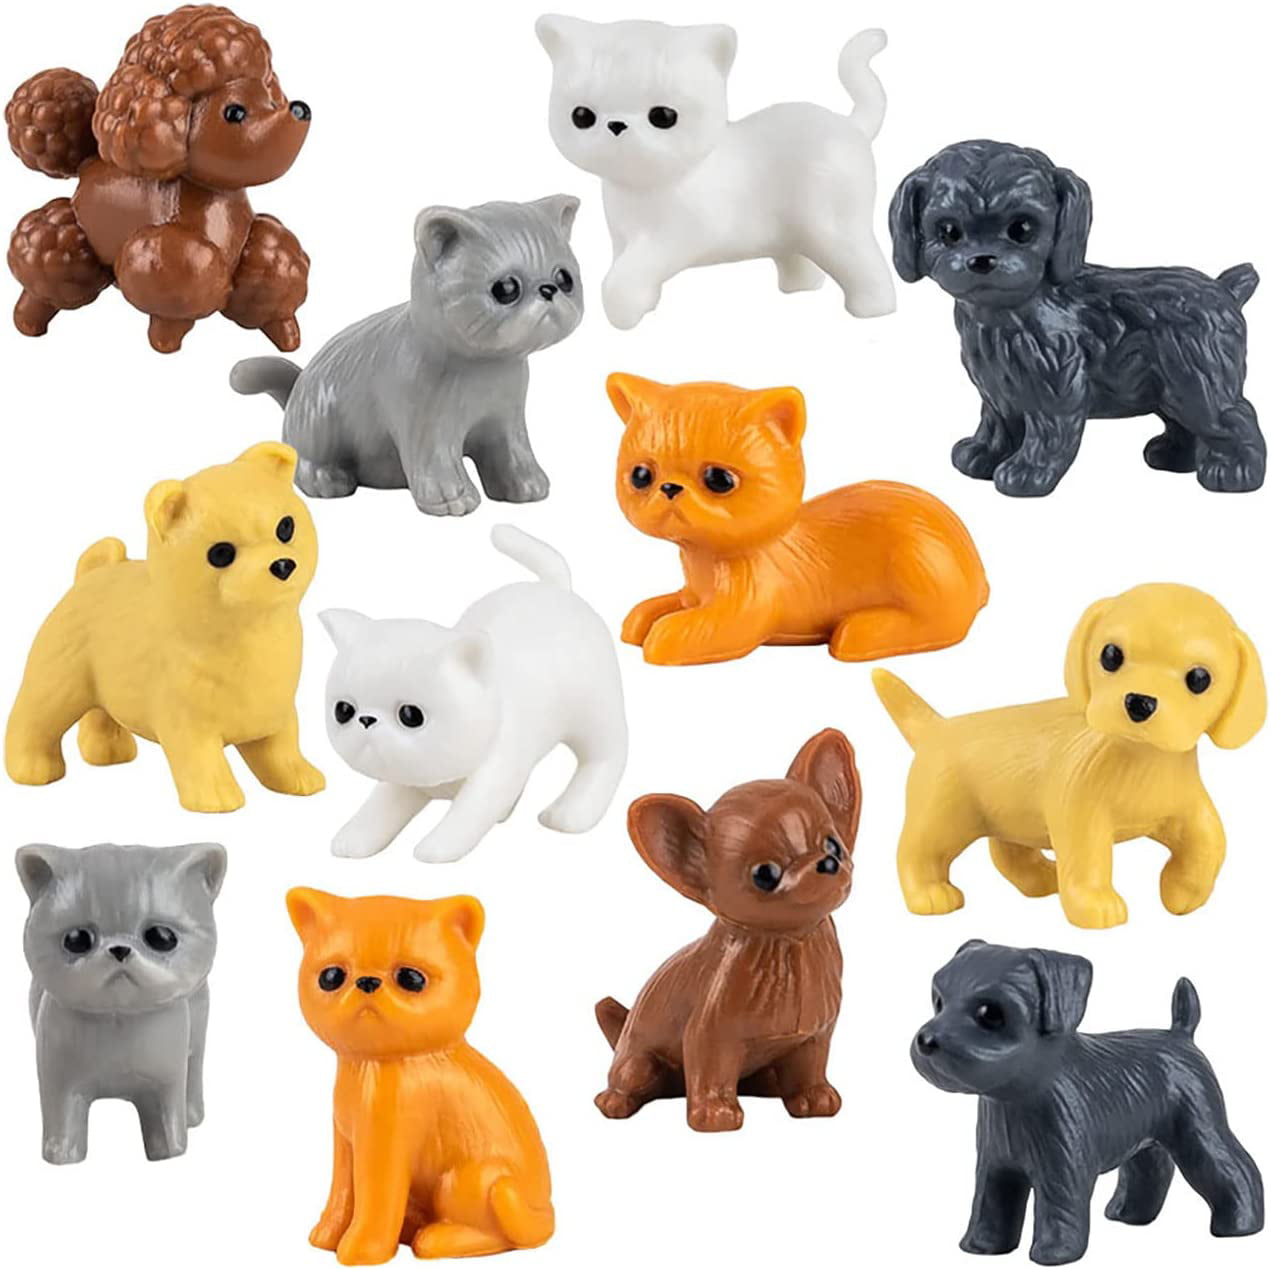 Buy 5 Get 2 Gifts 4-5 cm Loose Old Pet Shop Toys Cat Puppy Kitten Figure  Mini Toy Figures Classic Little Pet Toys